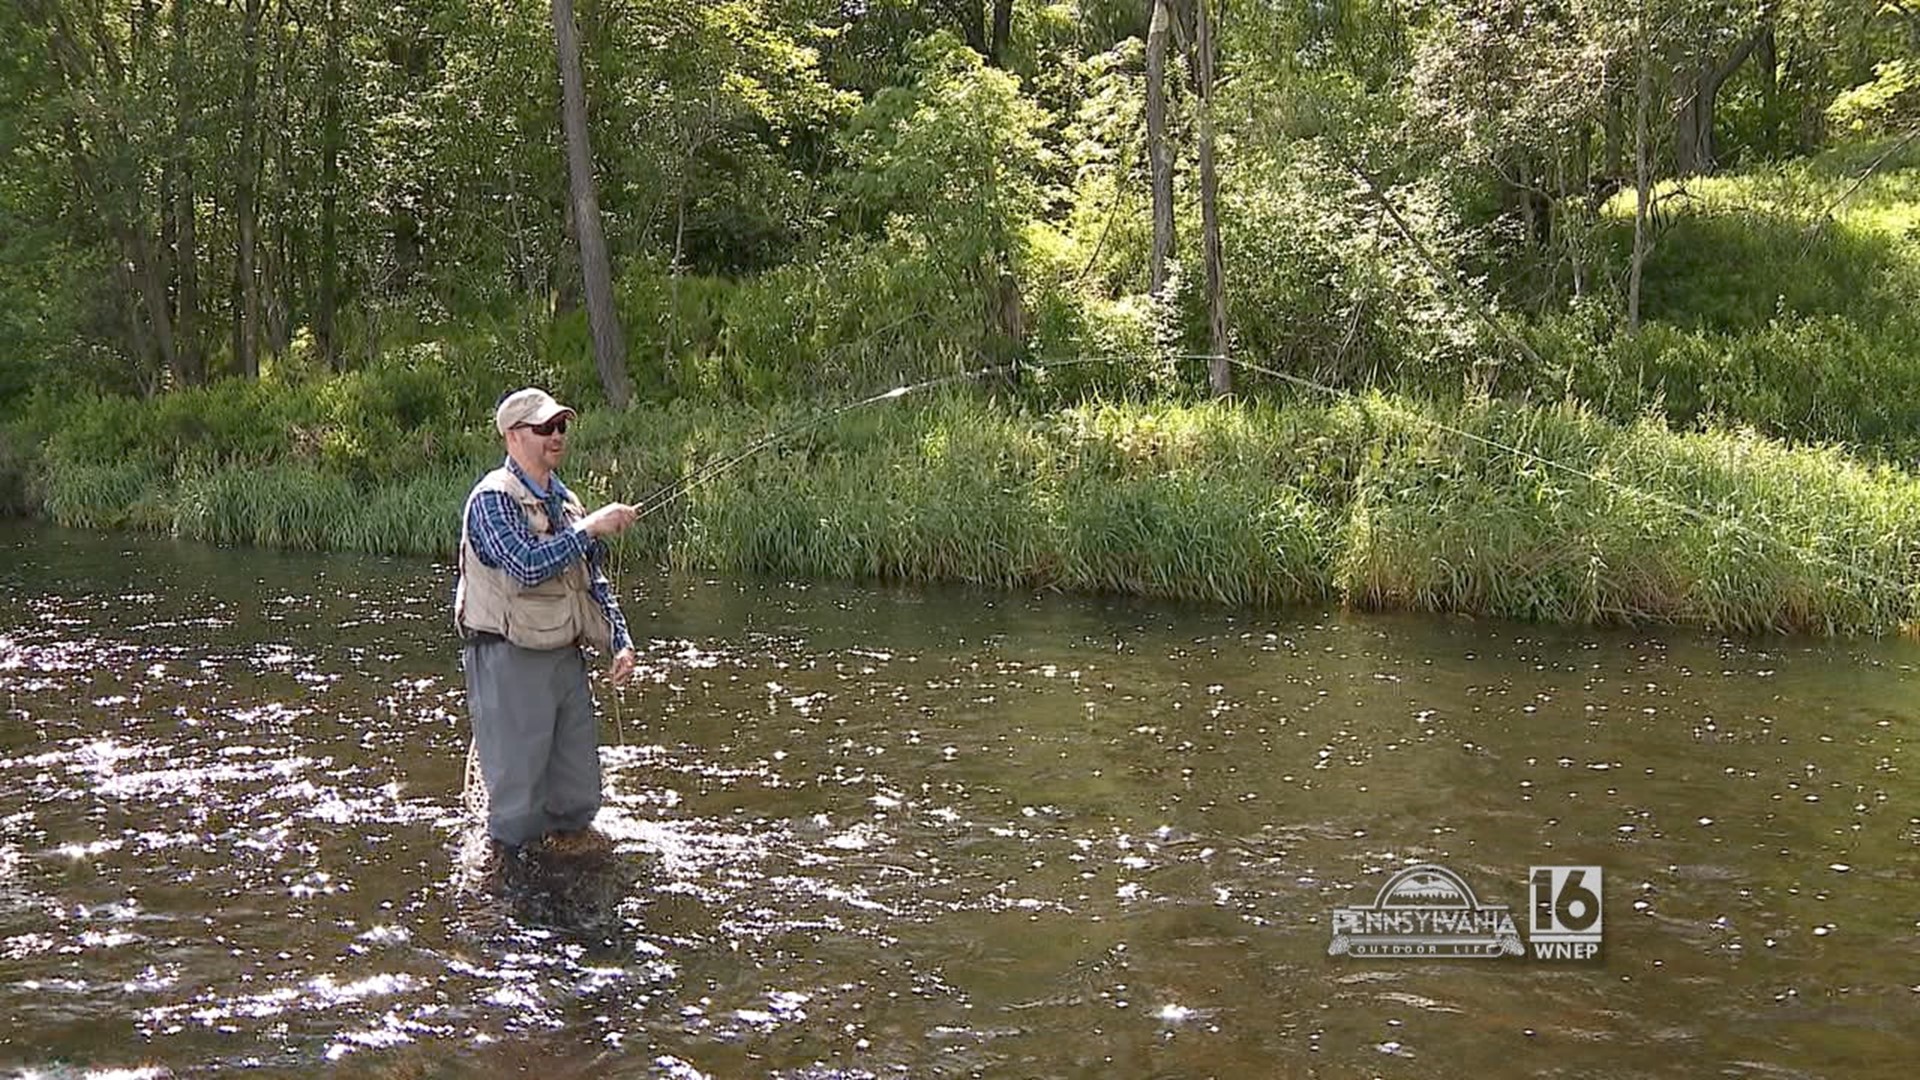 Fishing for wild trout on the Lehigh River